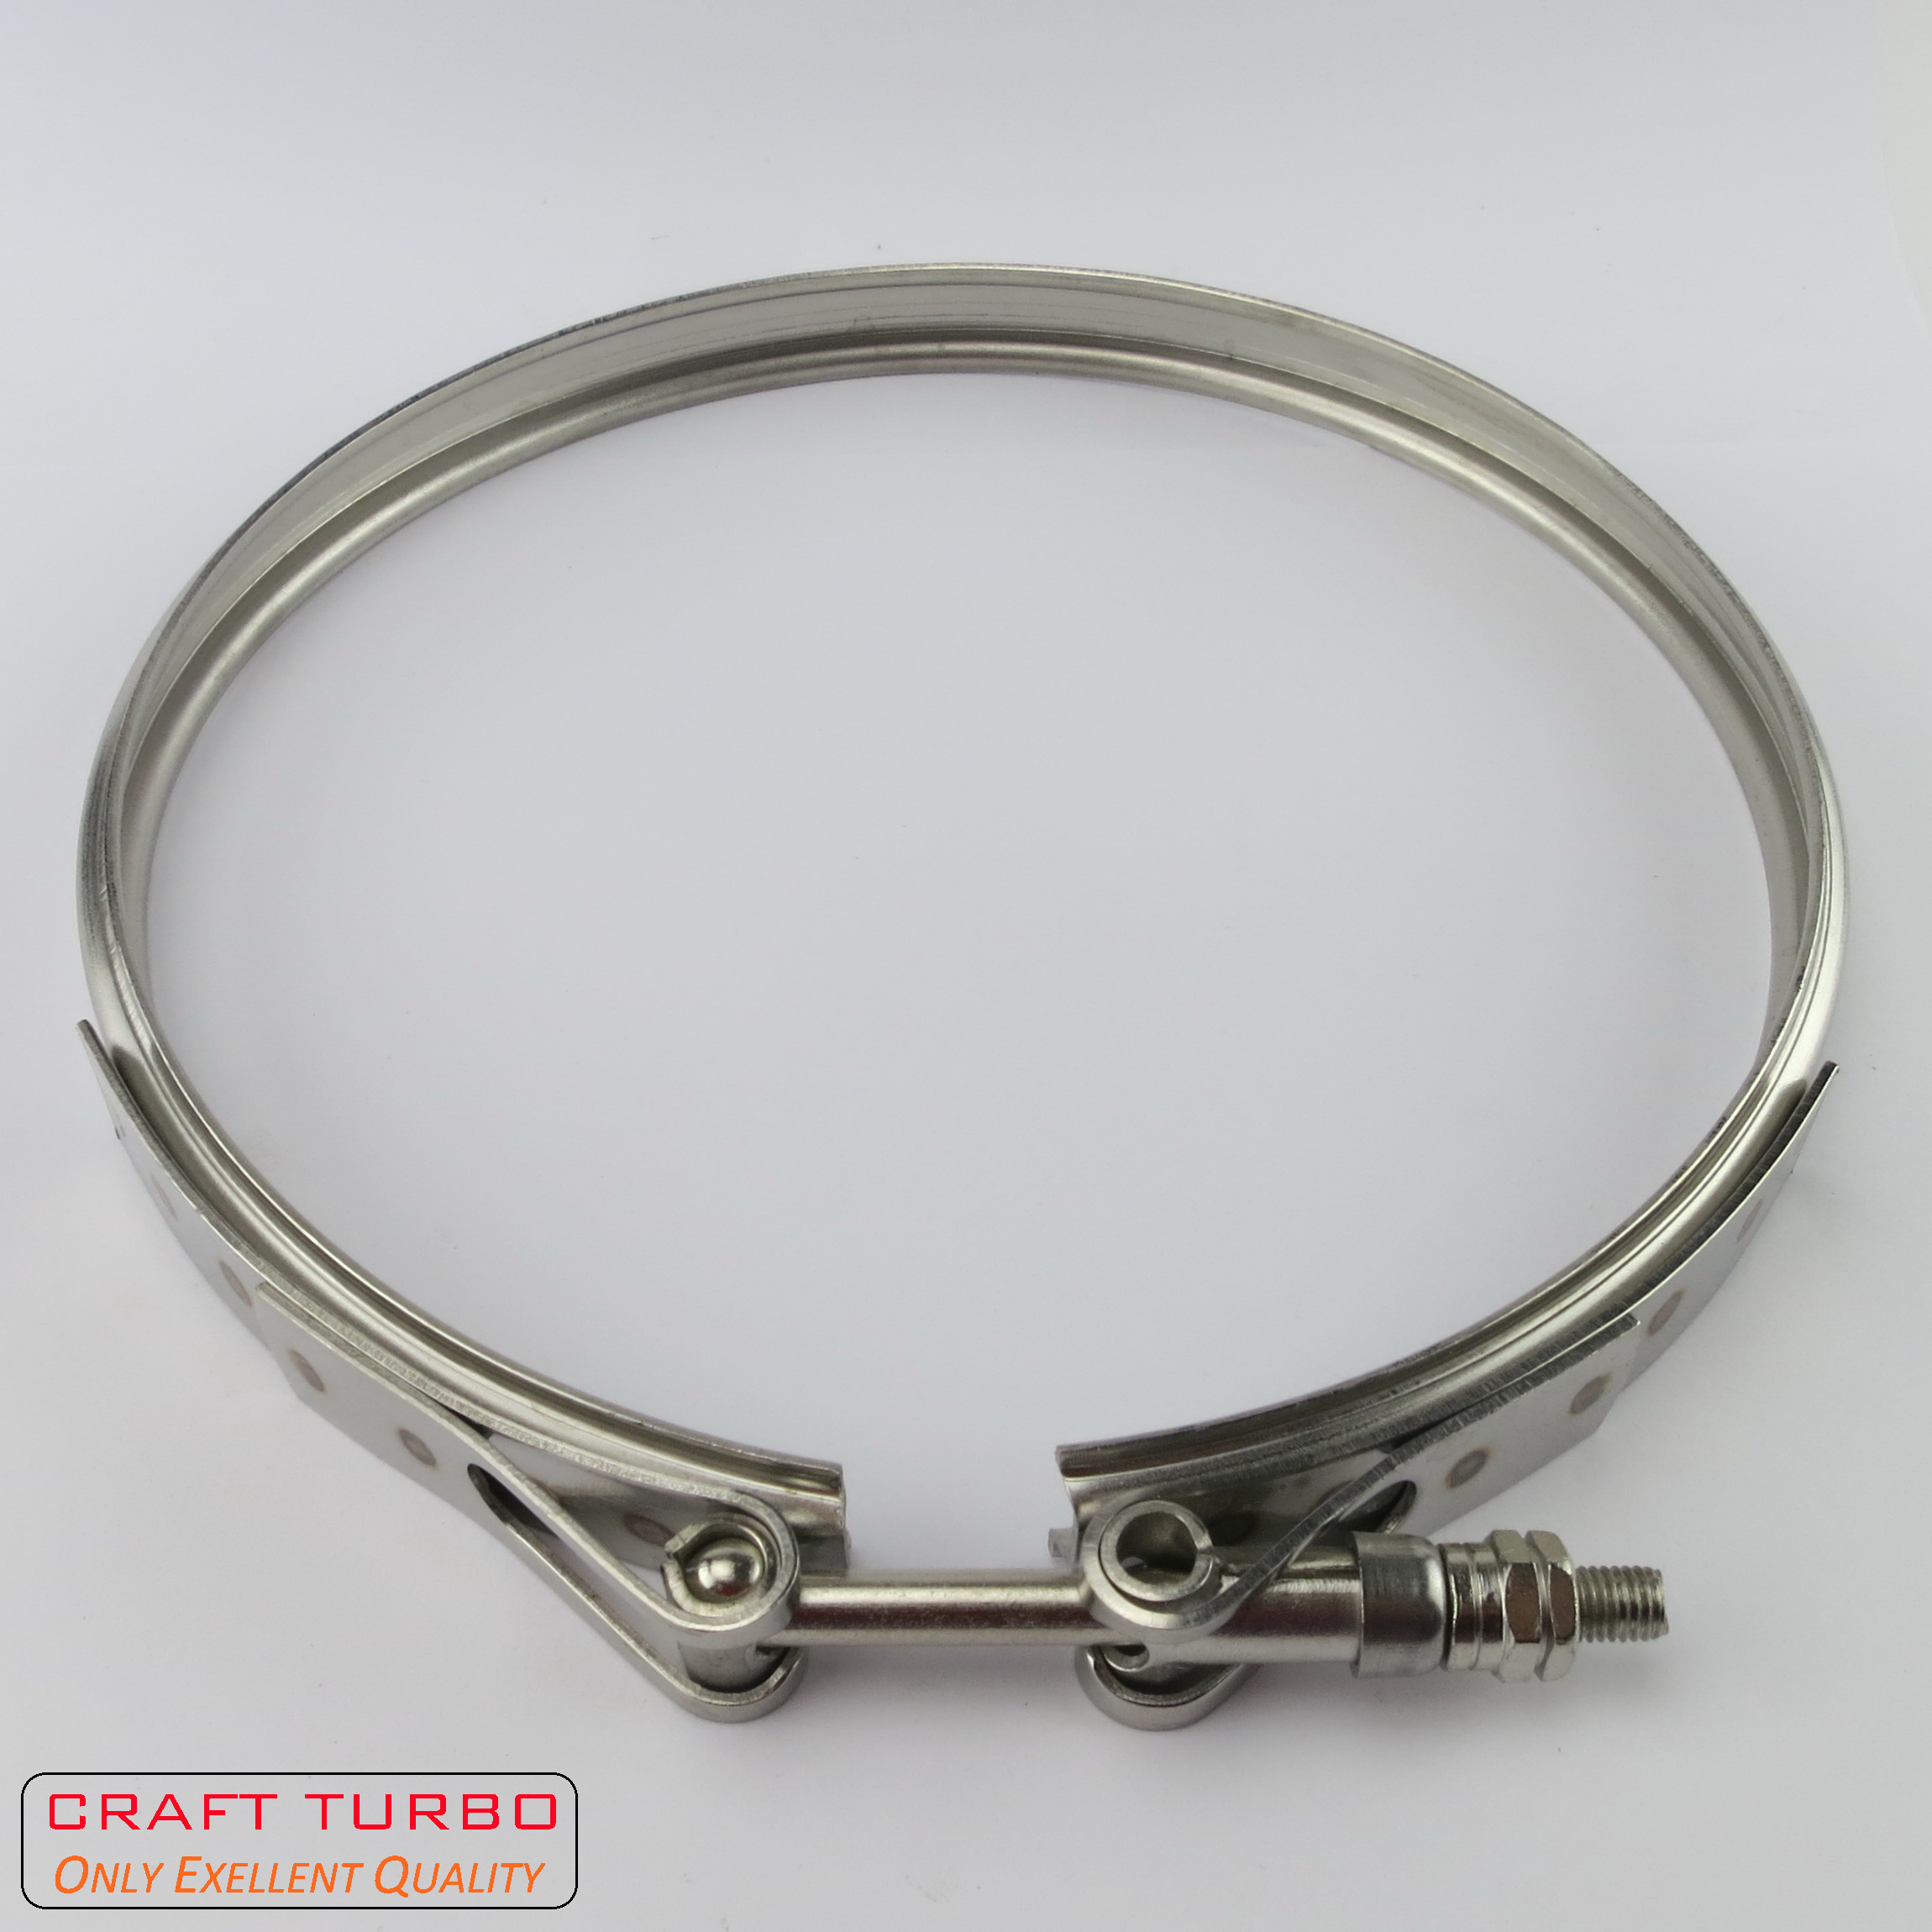 ∅185.5 V Band Clamps for Turbocharger